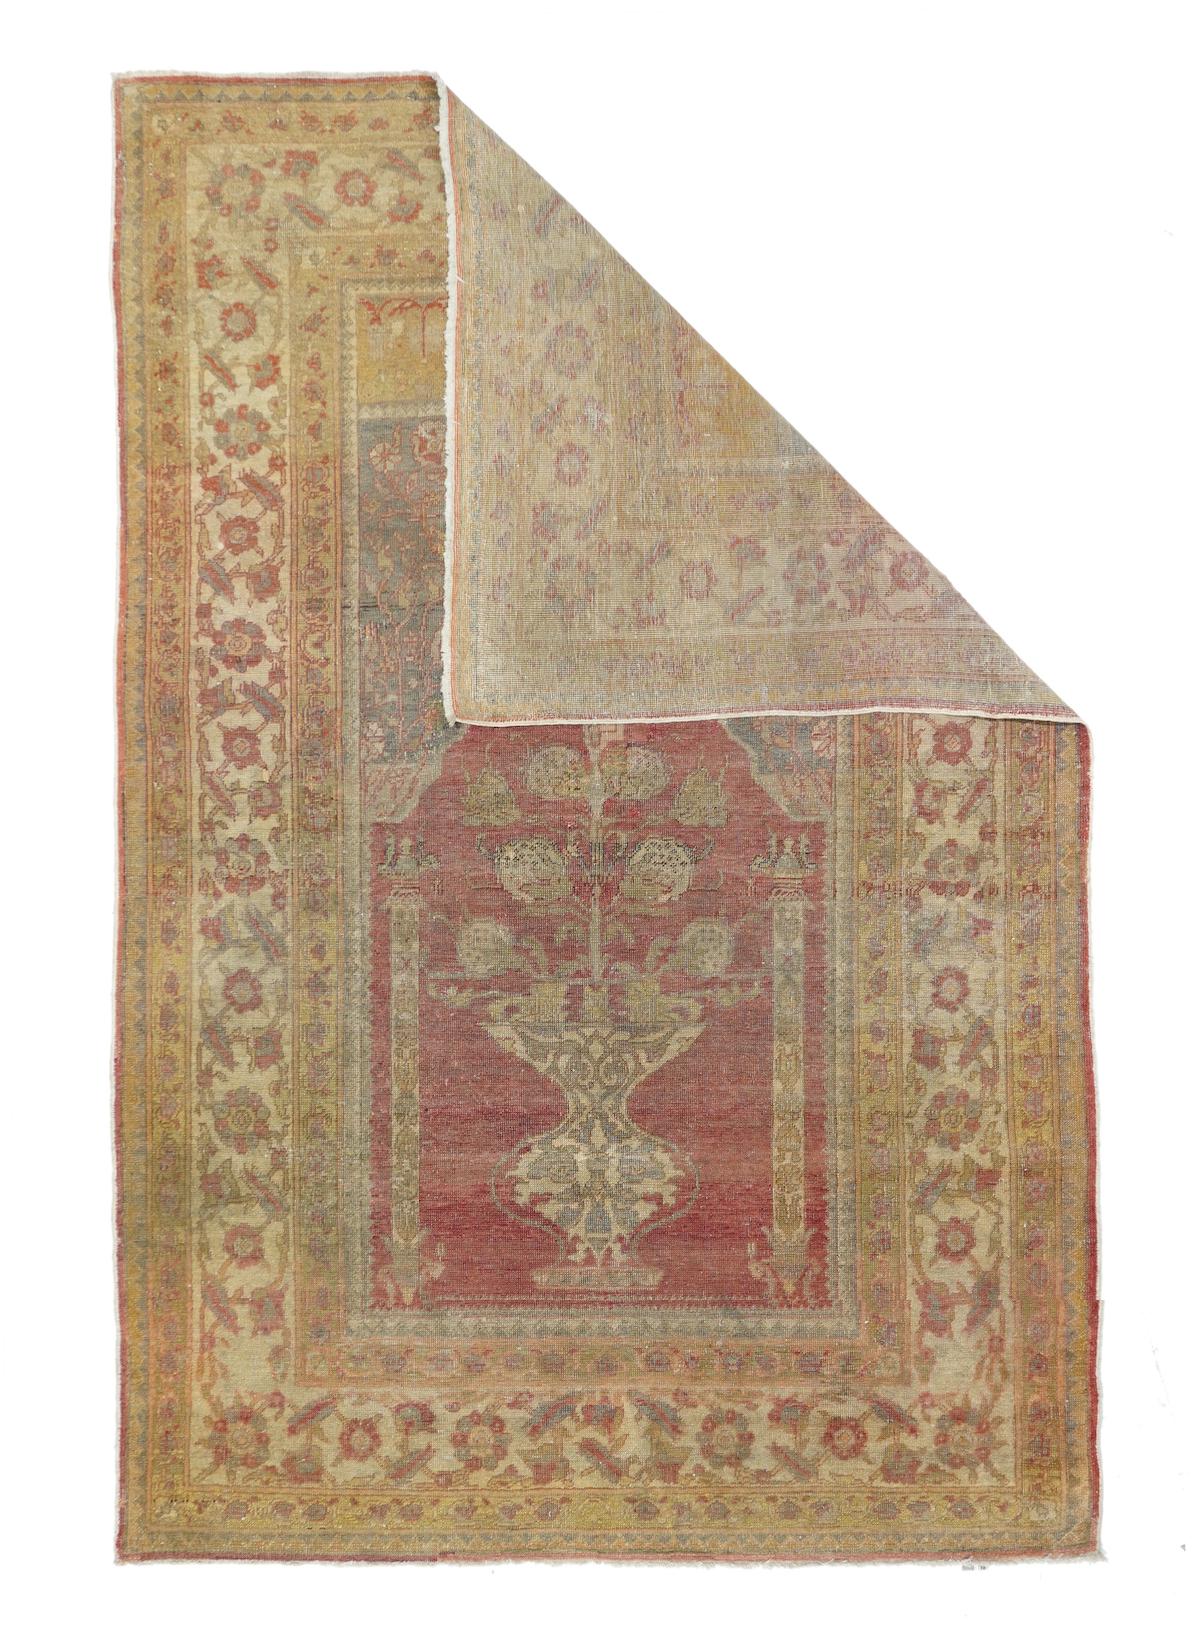 Antique Tabriz rug 4'3'' x 6'4''. Around 1900 there was a vogue in Tabriz for finely woven scatters in Turkish niche designs, often, as here, with red field and semi-functional side columns. A giant vase yields a flowering rose bush, with a wavy